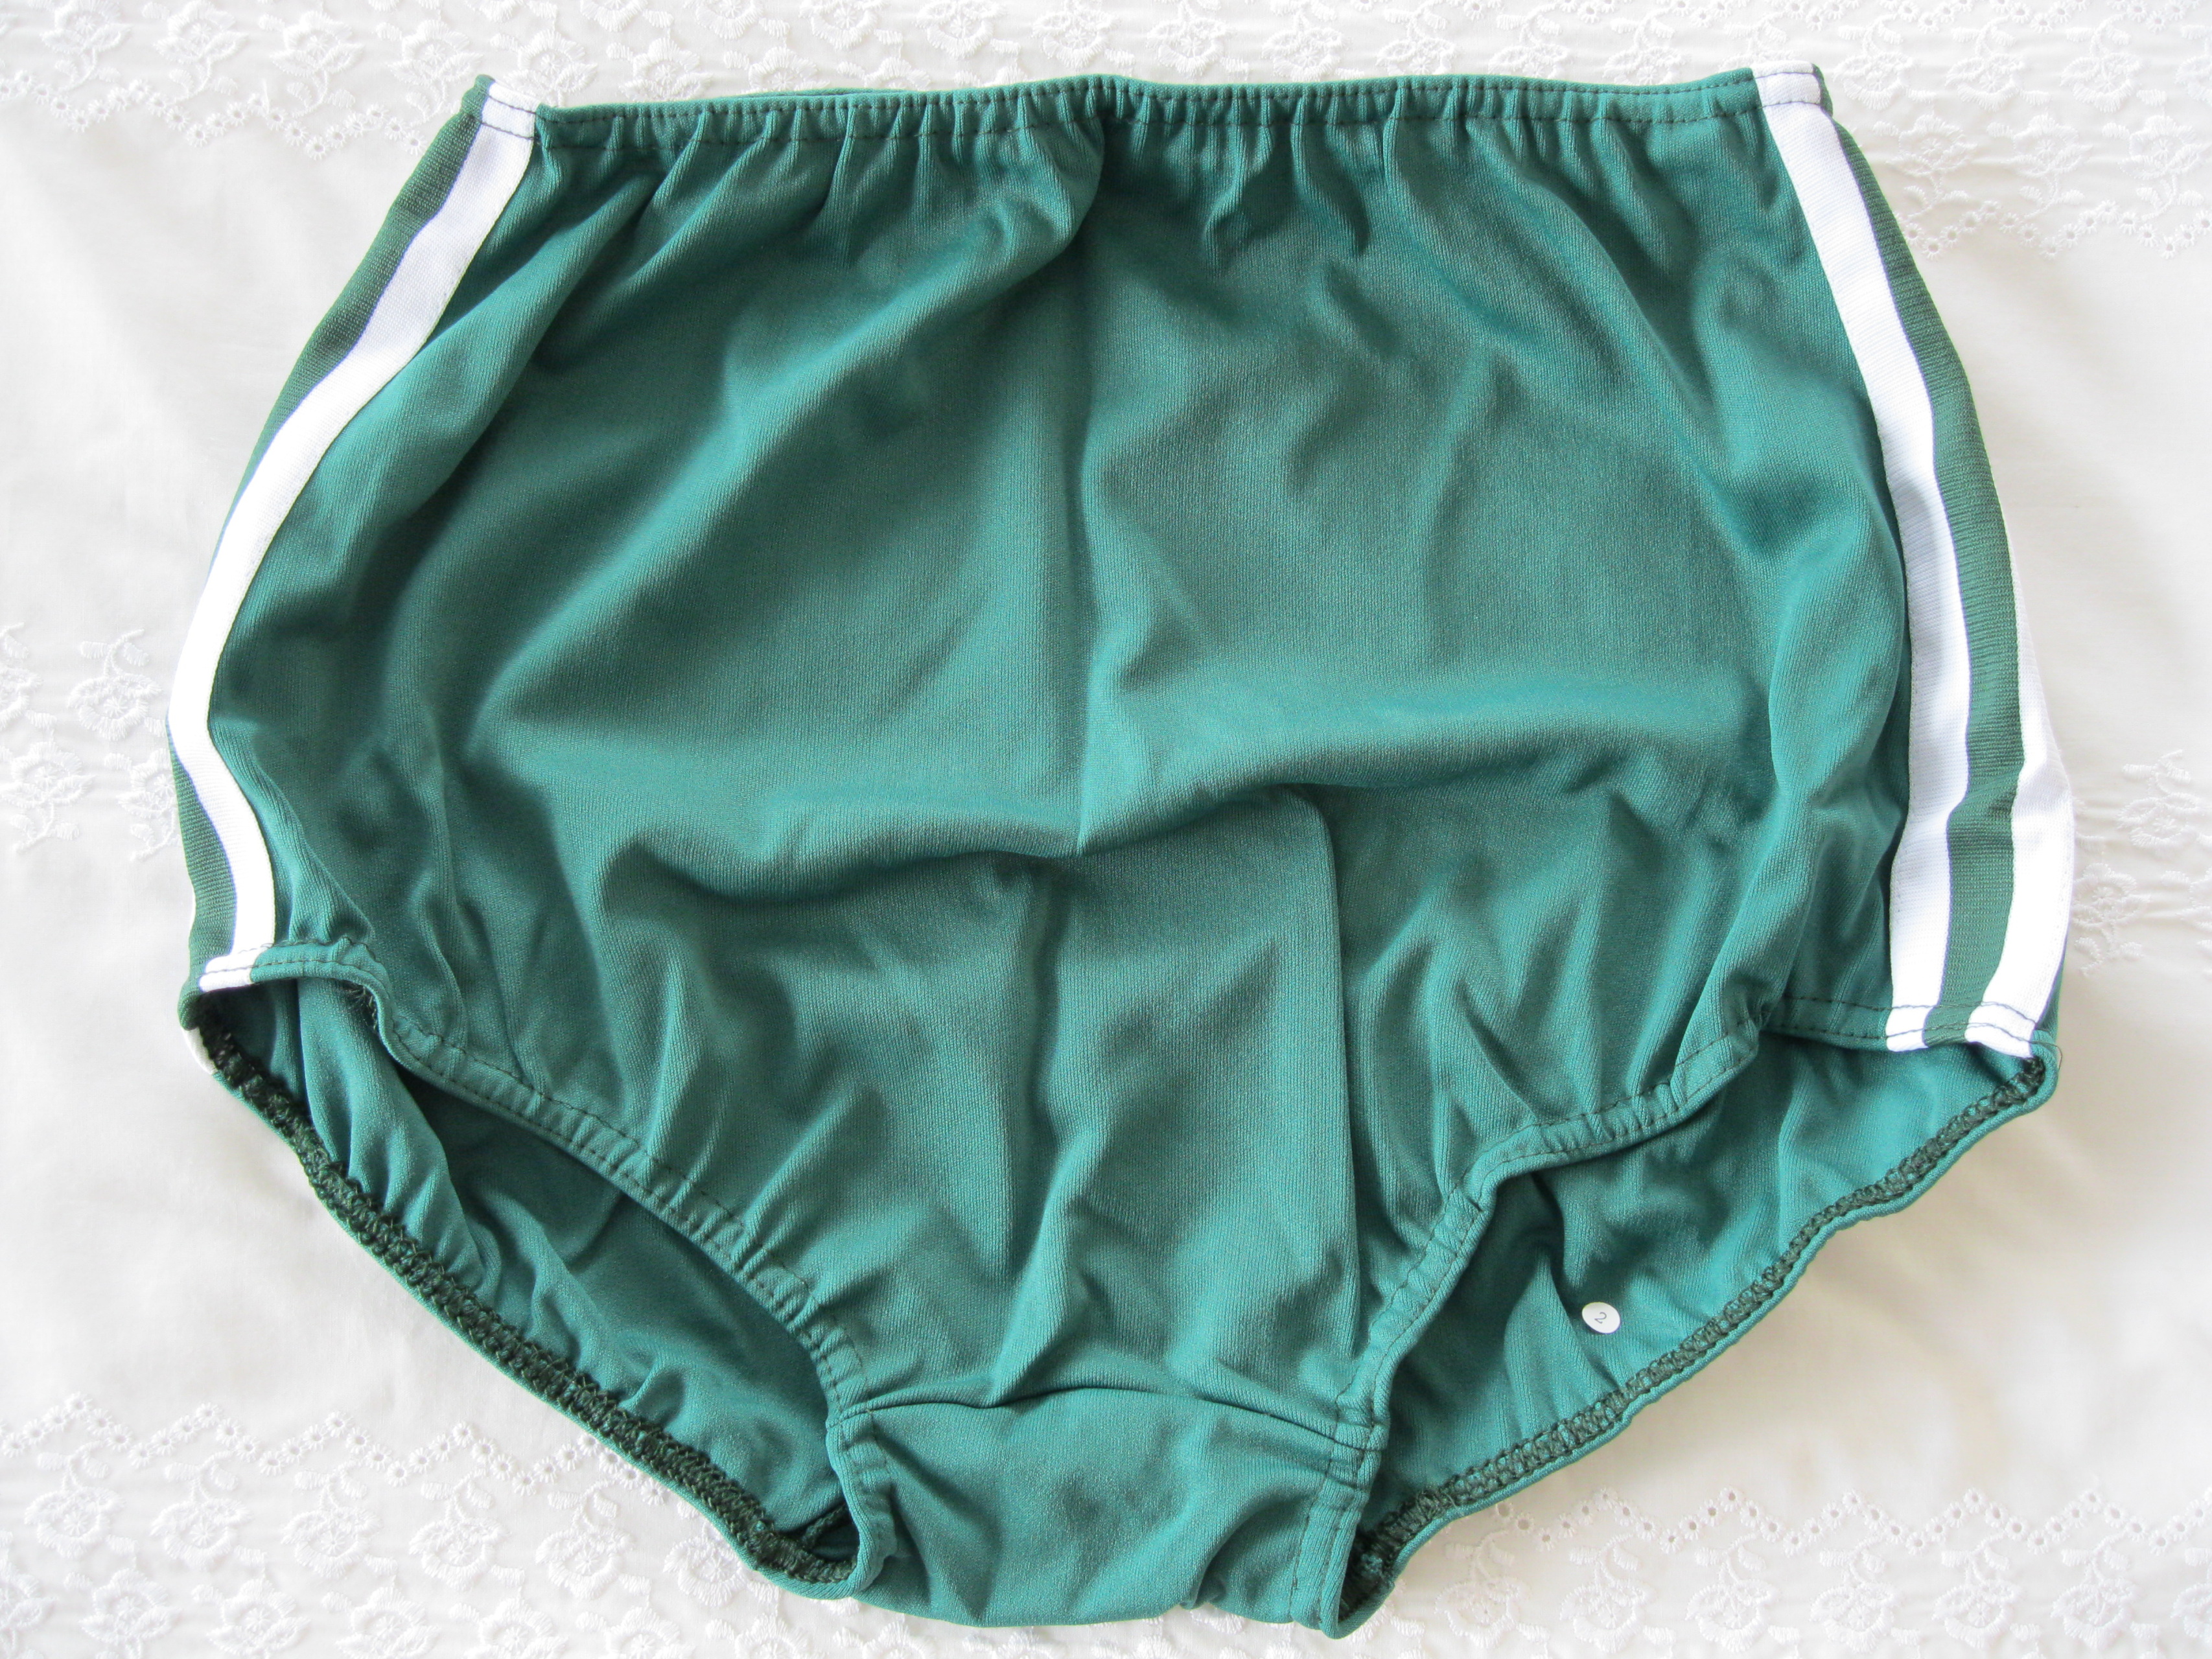 Vintage 1960s School Knickers, Netball Panties Briefs green size small